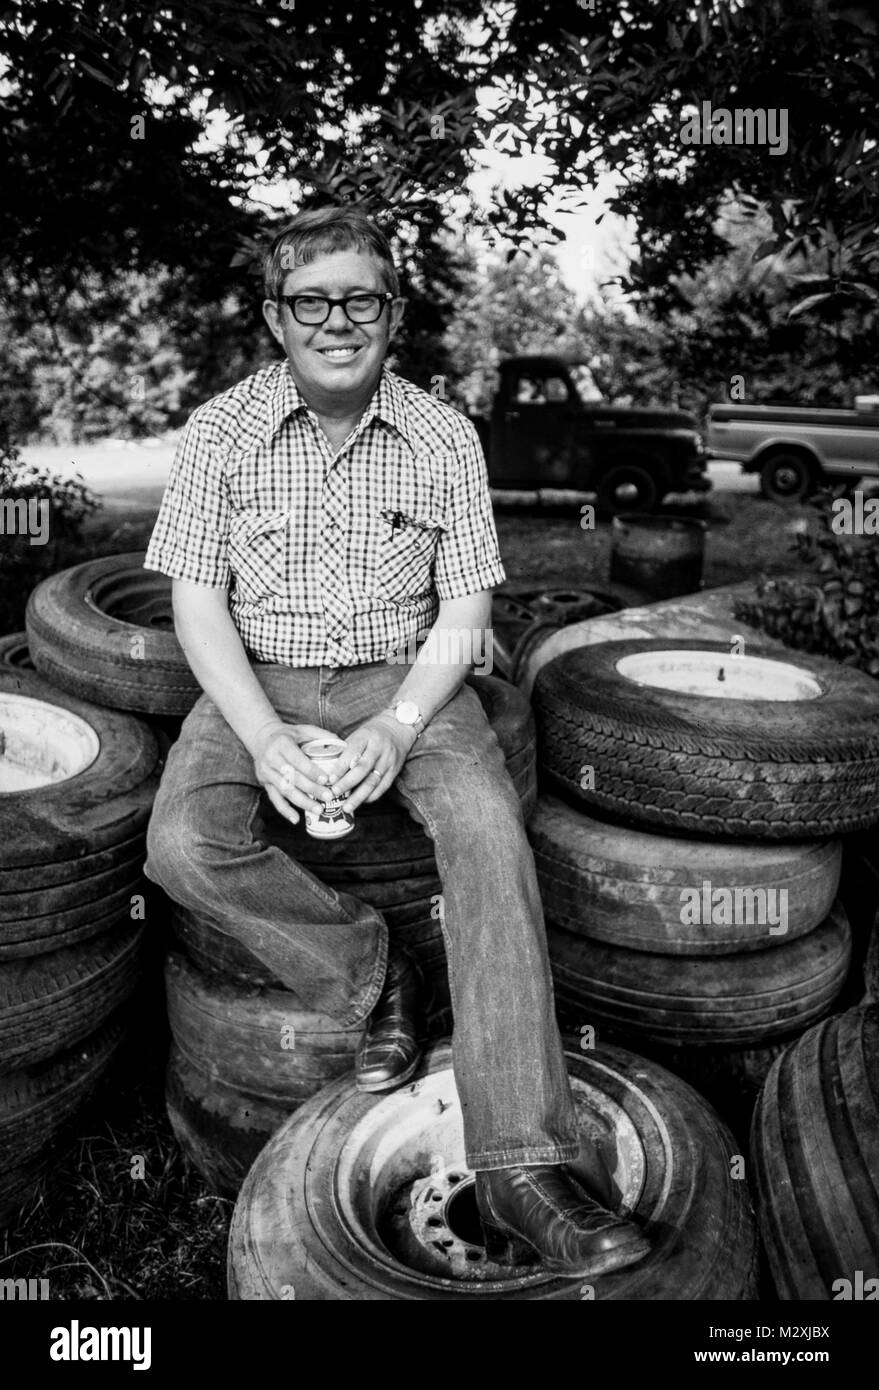 Billy Carter sits on a pile of old tires at his gas station. He was an American farmer and businessman and the younger brother of Pres.  Jimmy Carter. Stock Photo